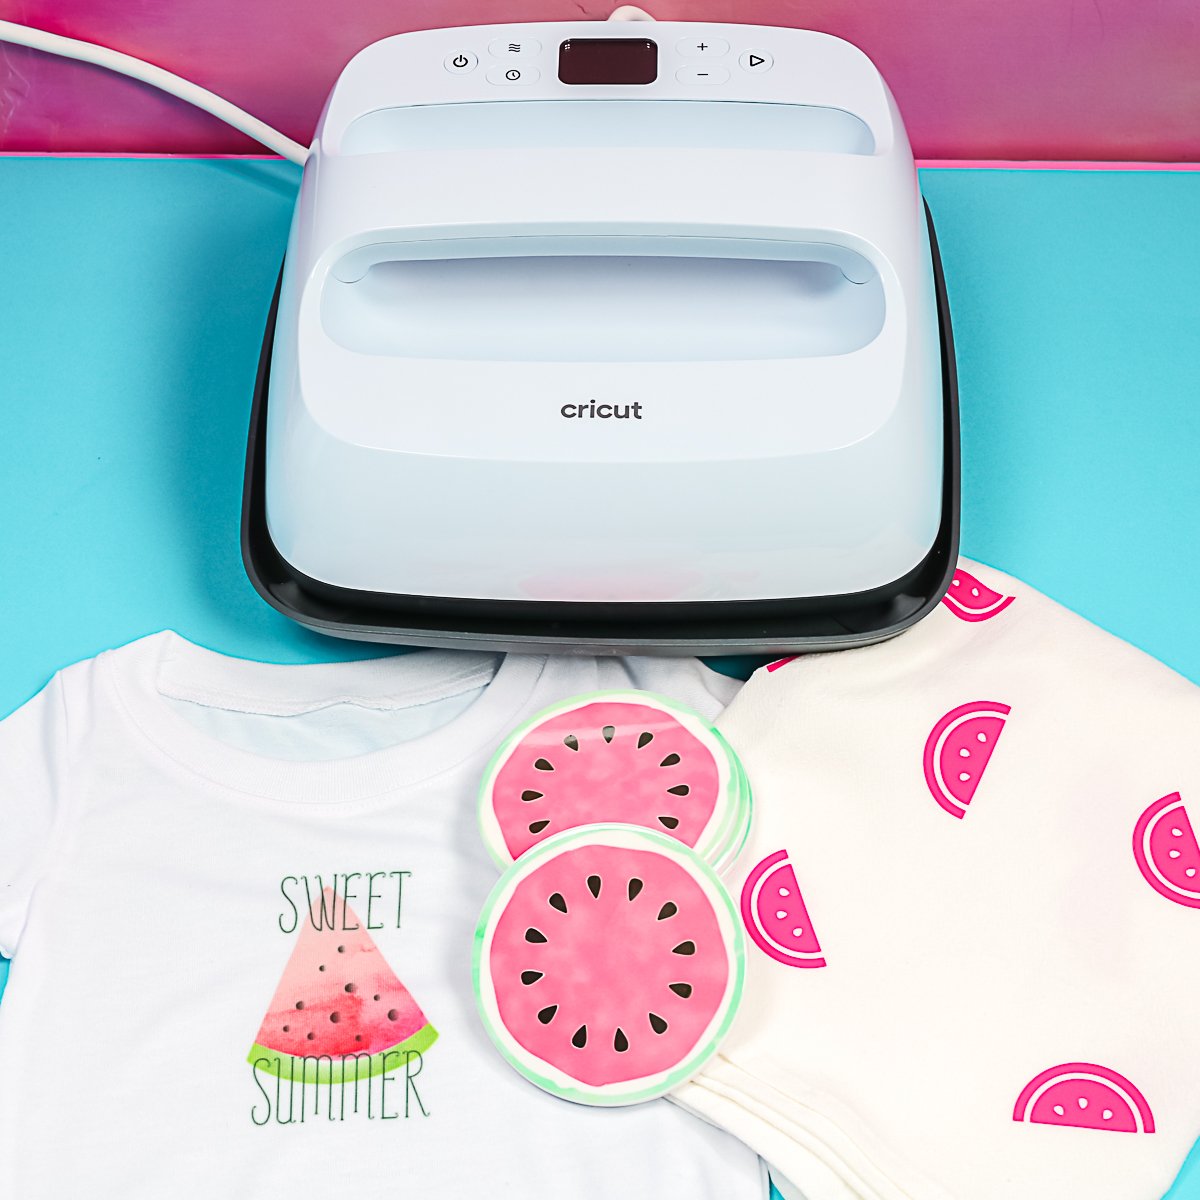 Cricut EasyPress 3 Review: New Features and Upgrading - Angie Holden The  Country Chic Cottage